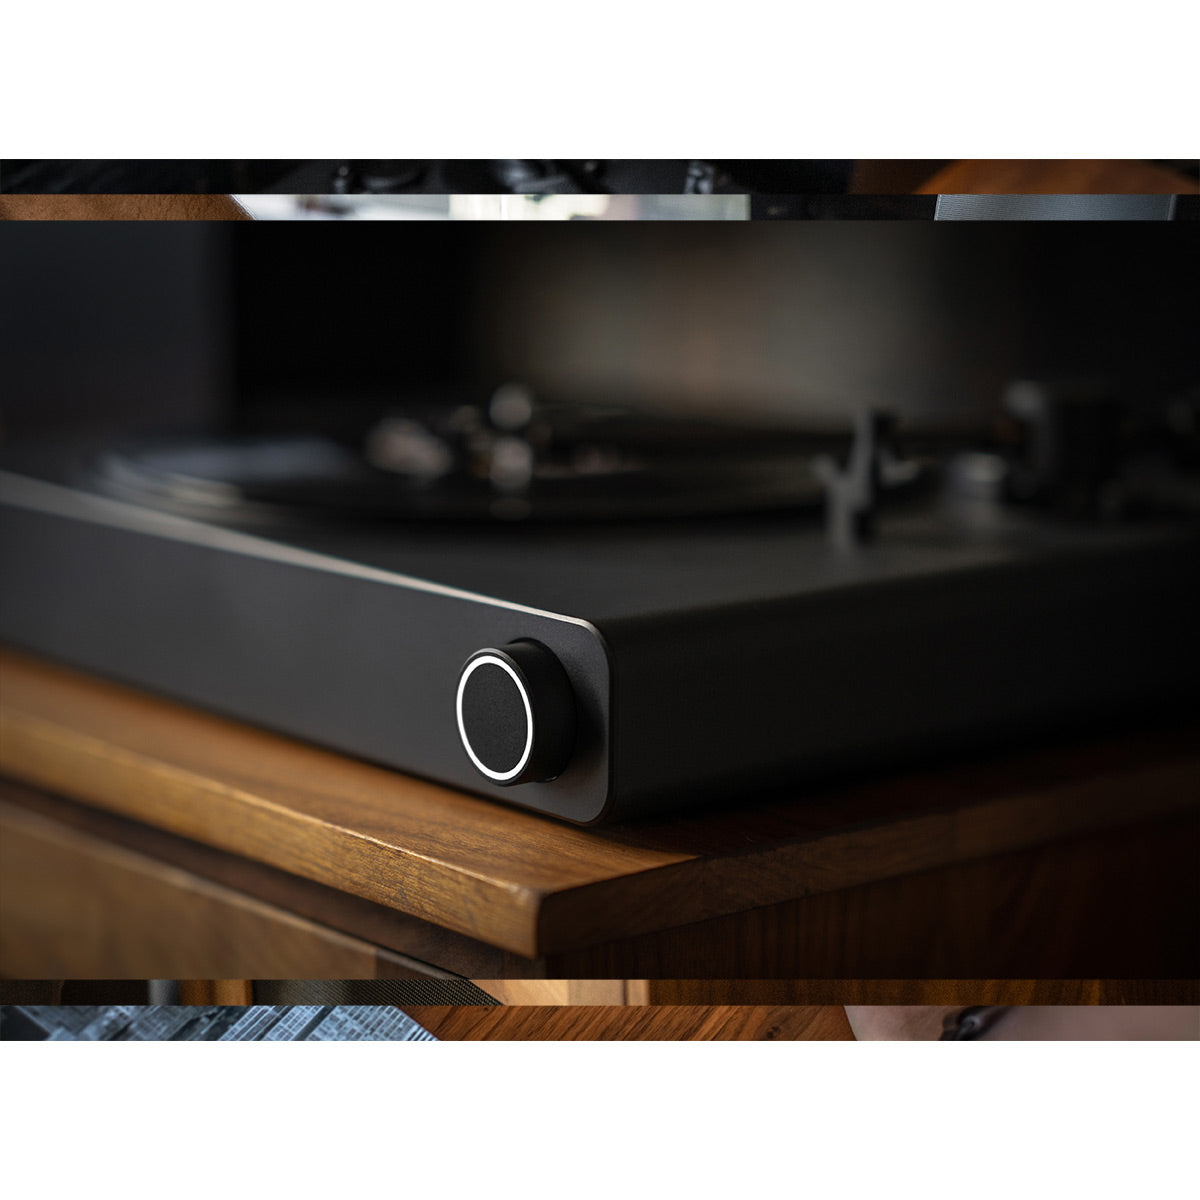 Victrola Stream Onyx Works with Sonos Wireless Turntable with Sonos Five Wireless Speaker for Streaming Music (Black)